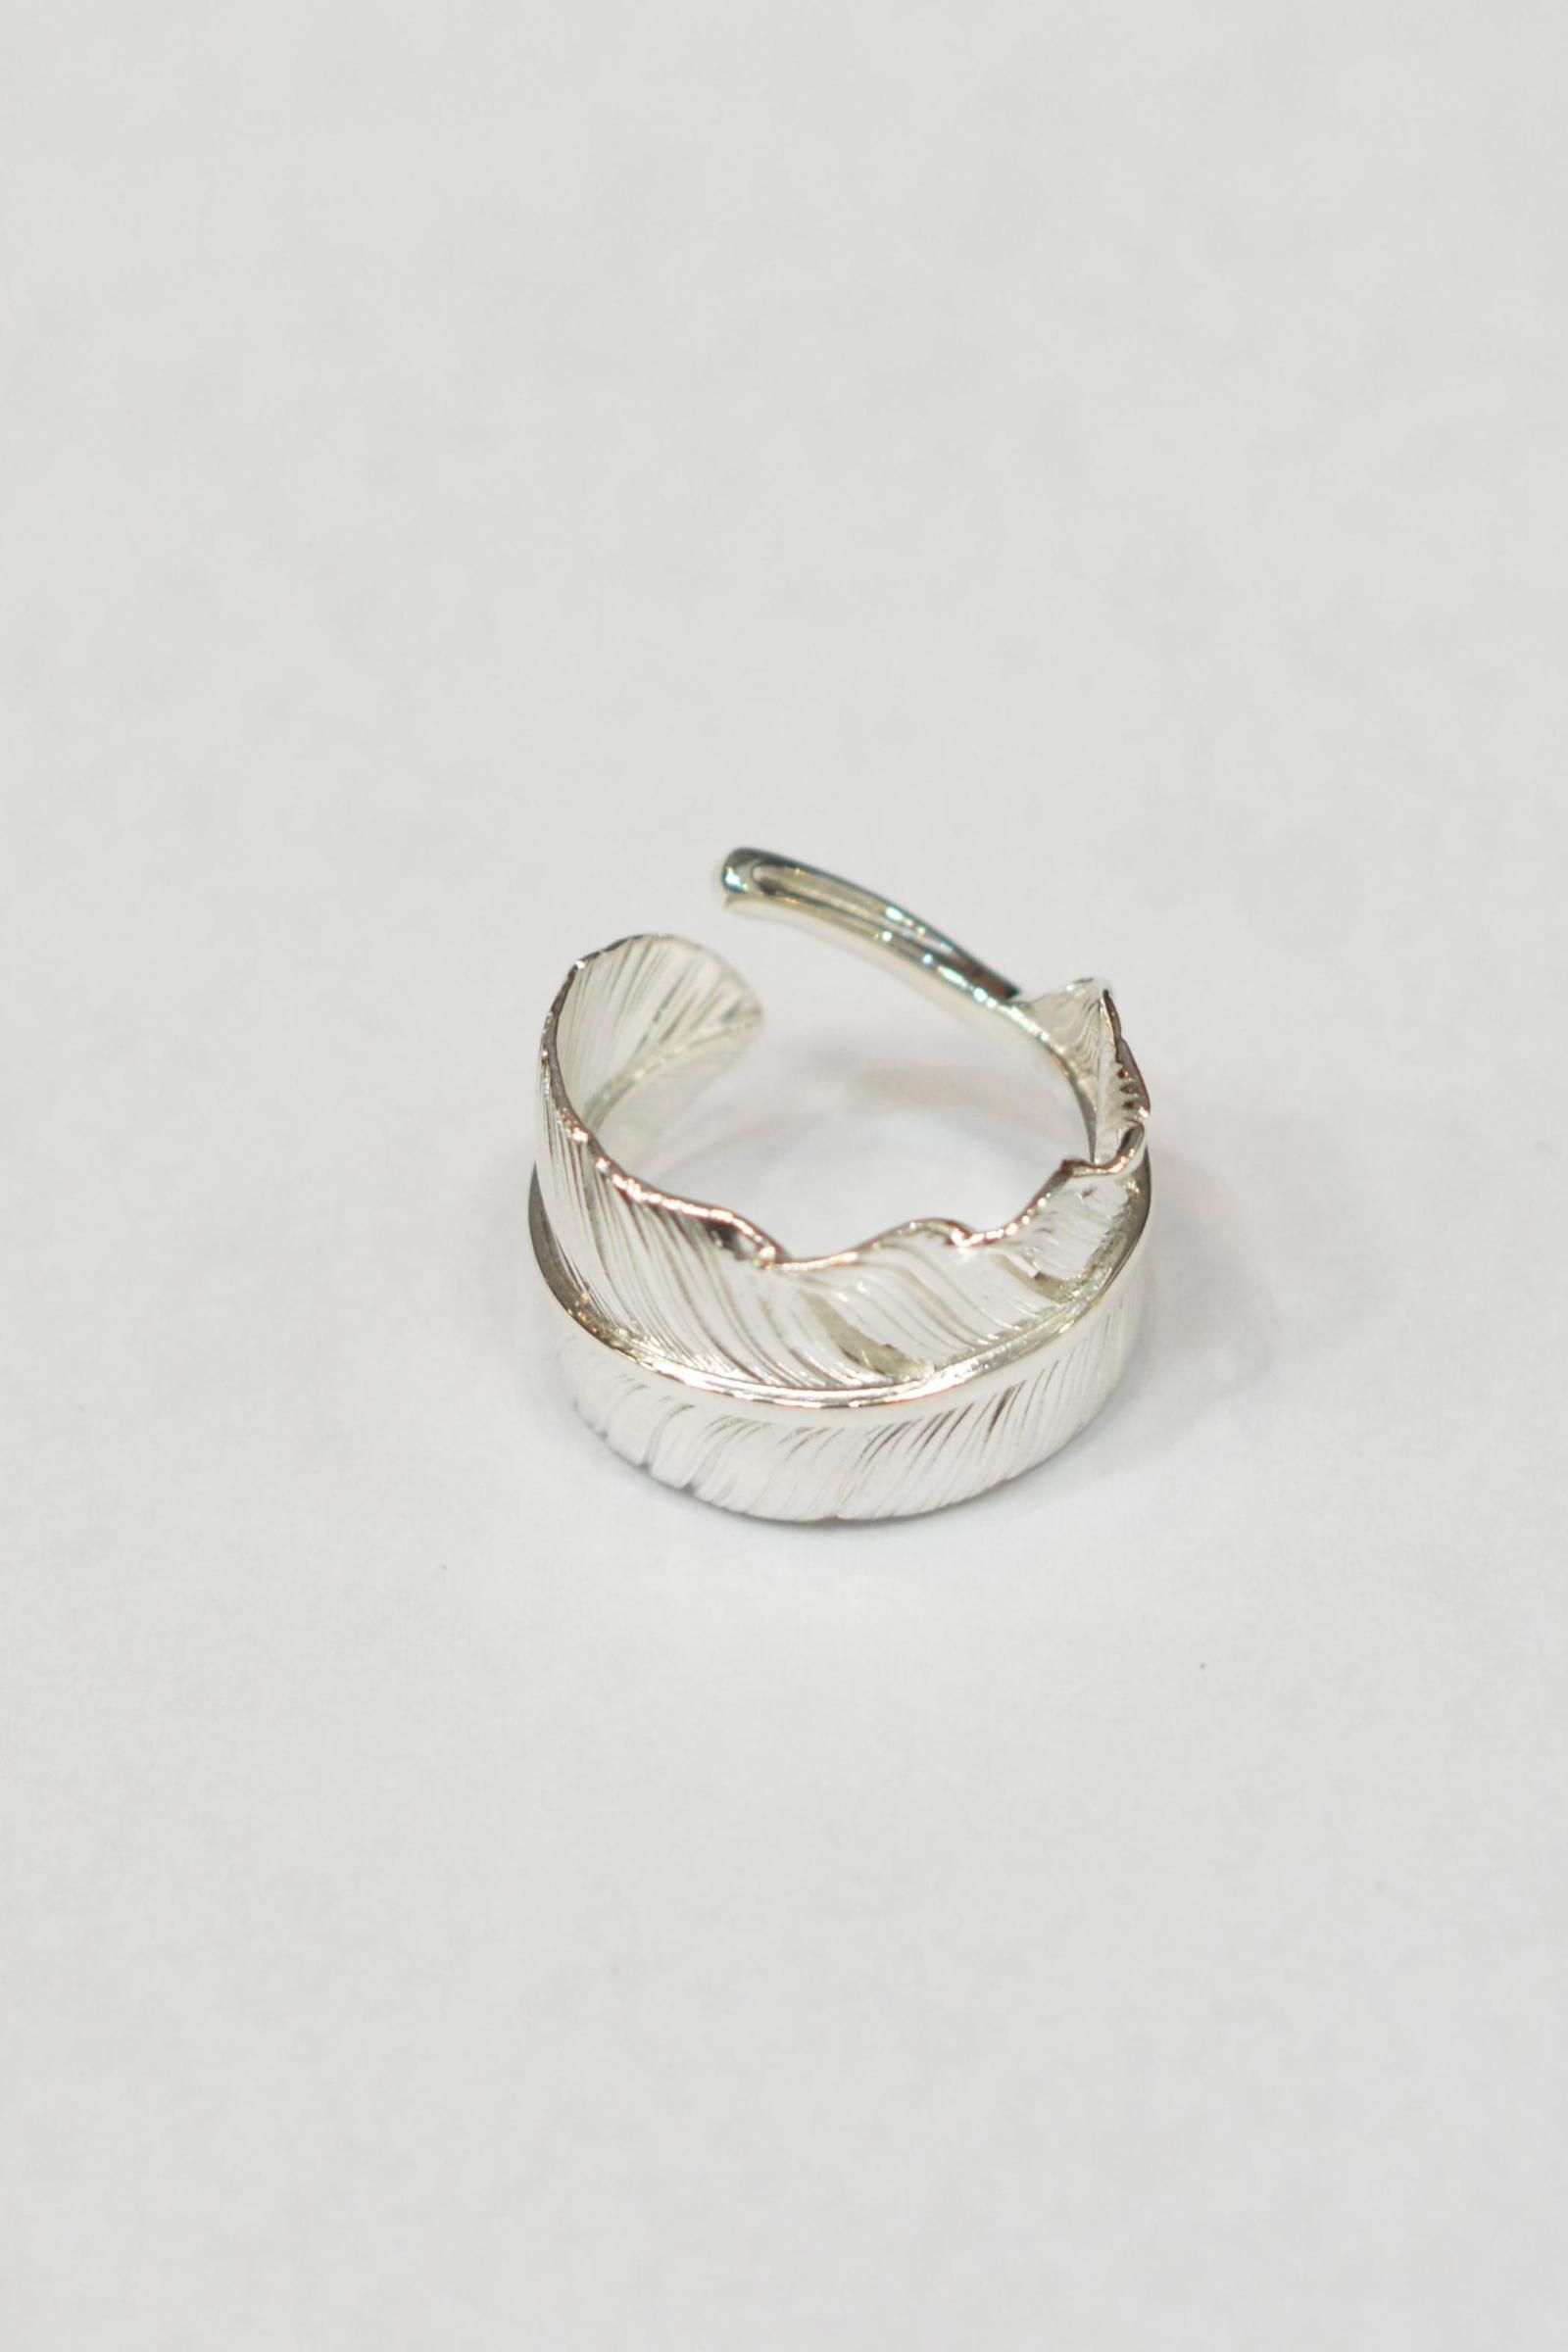 TARO WASHIMI - L old feather ring 02 | chord online store